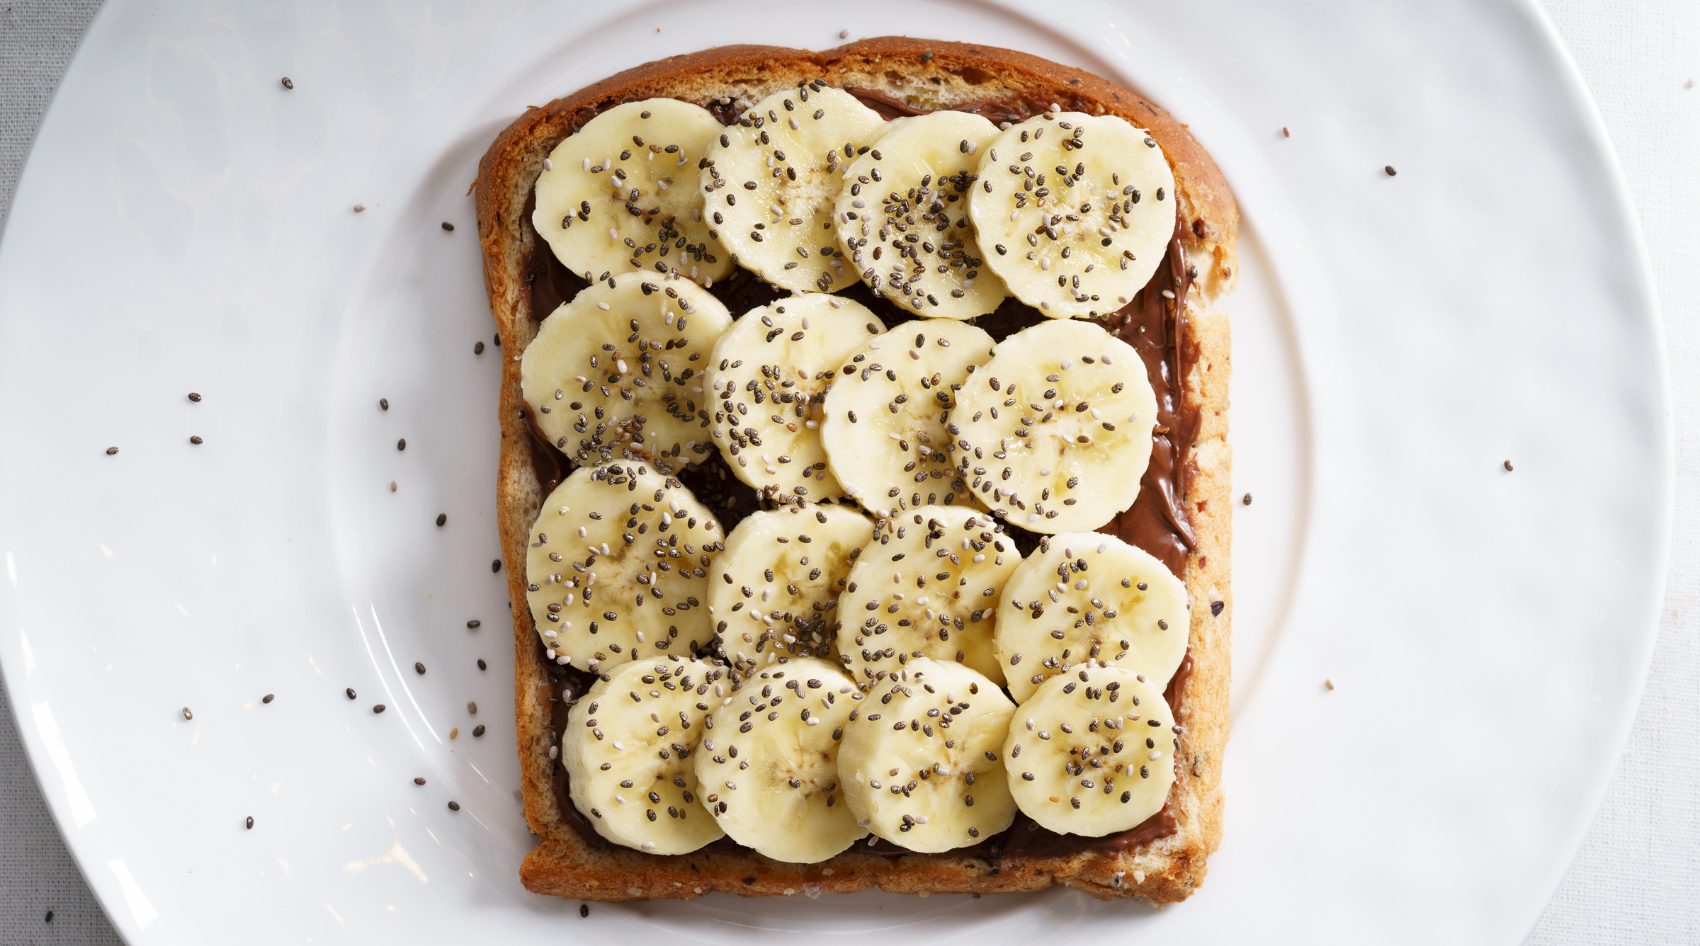 Snack All Day Long with Chia Seeds